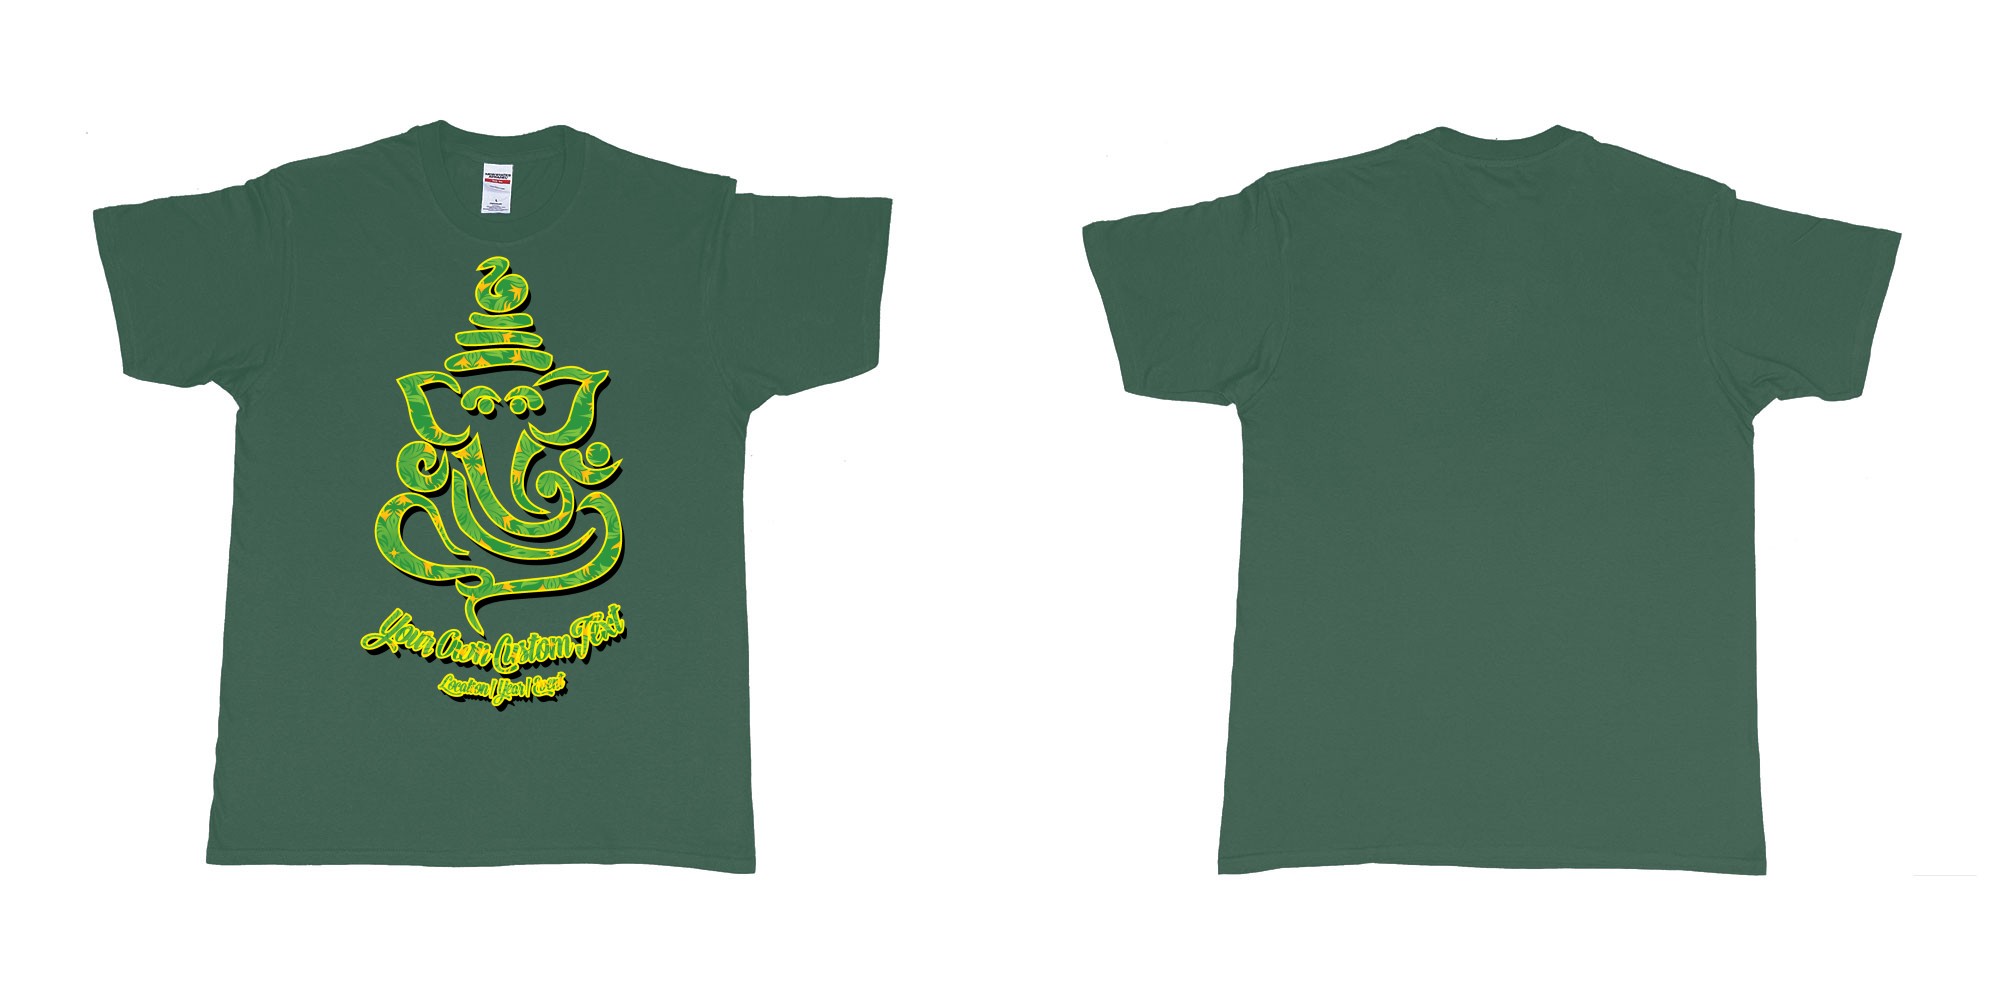 Custom tshirt design ganesh soft jungle yoga customize own design in fabric color forest-green choice your own text made in Bali by The Pirate Way